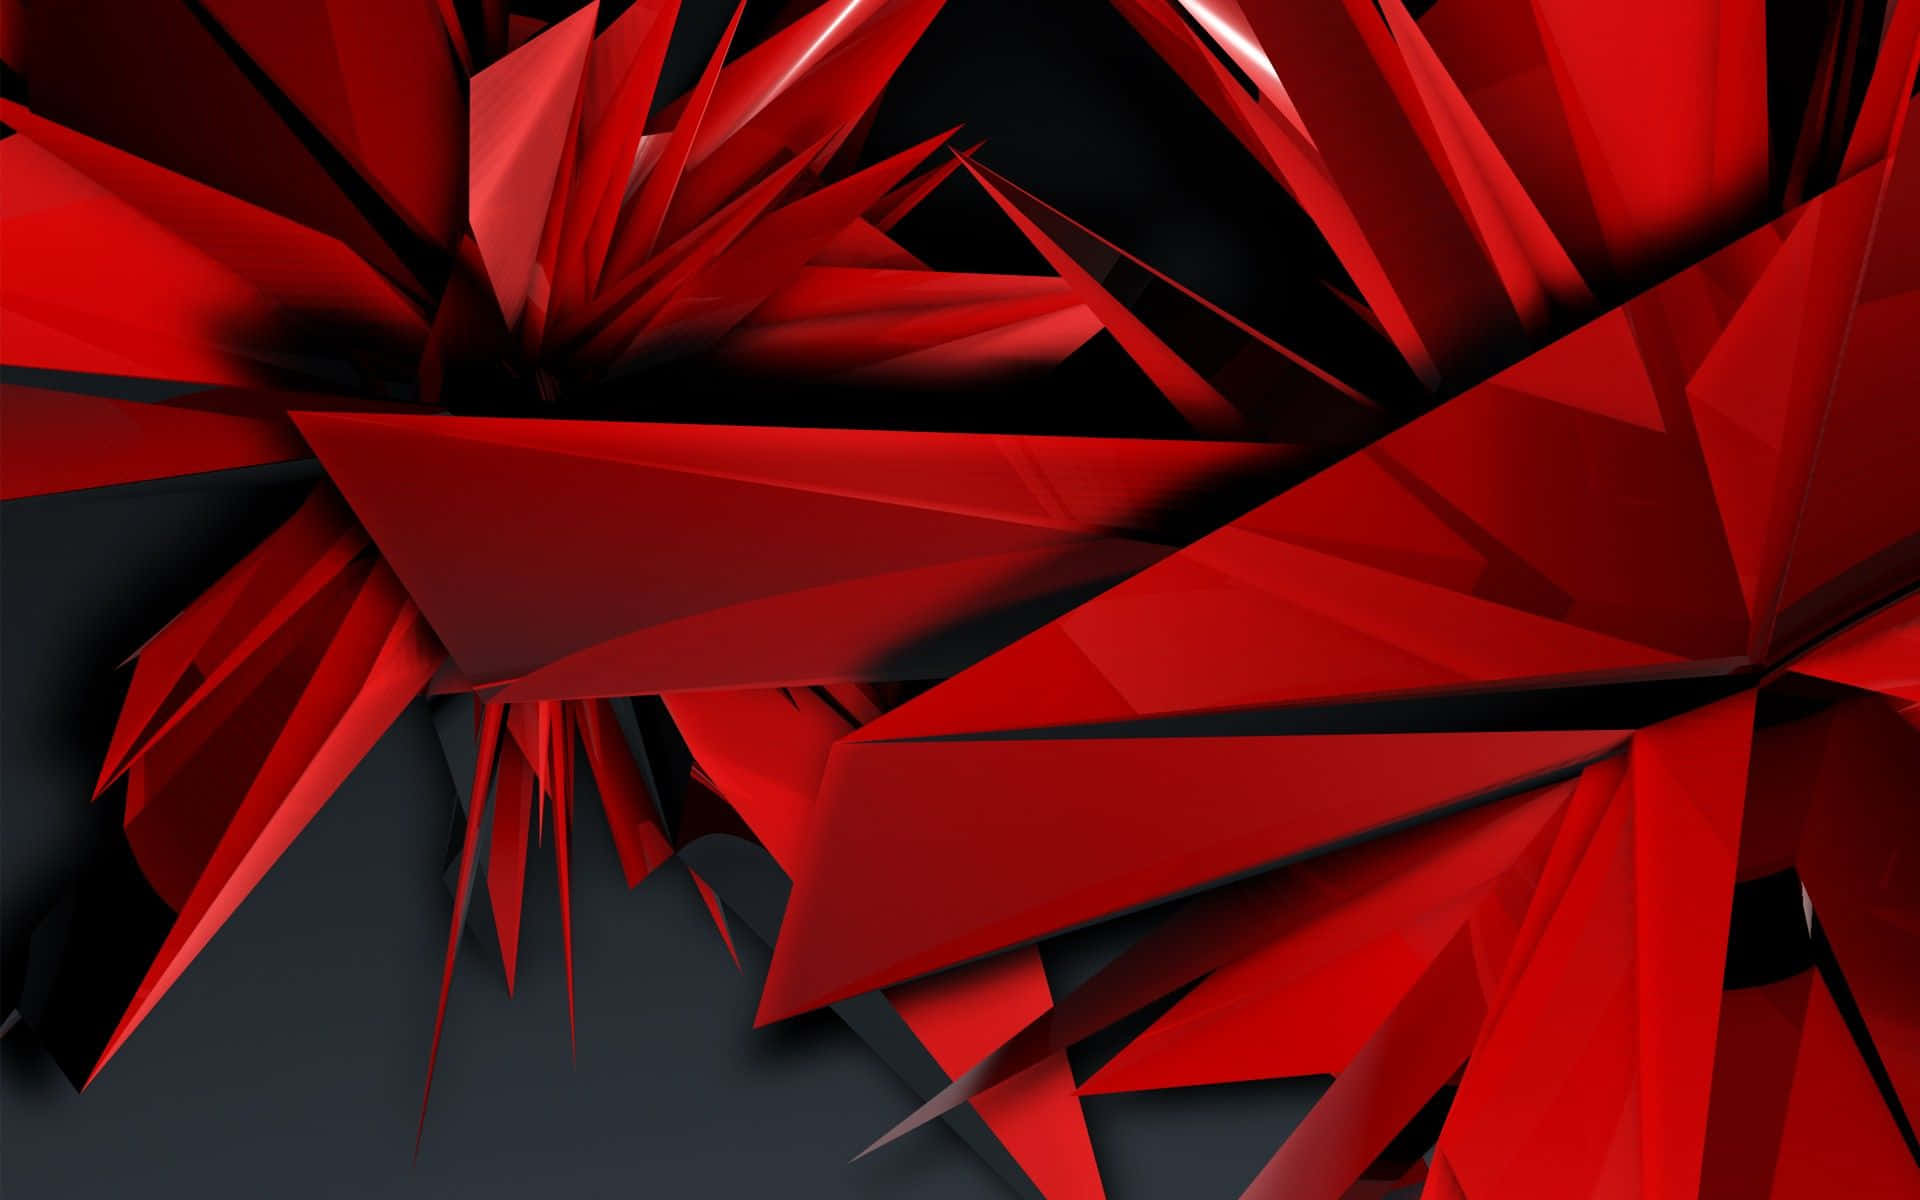 Cool Abstract Background